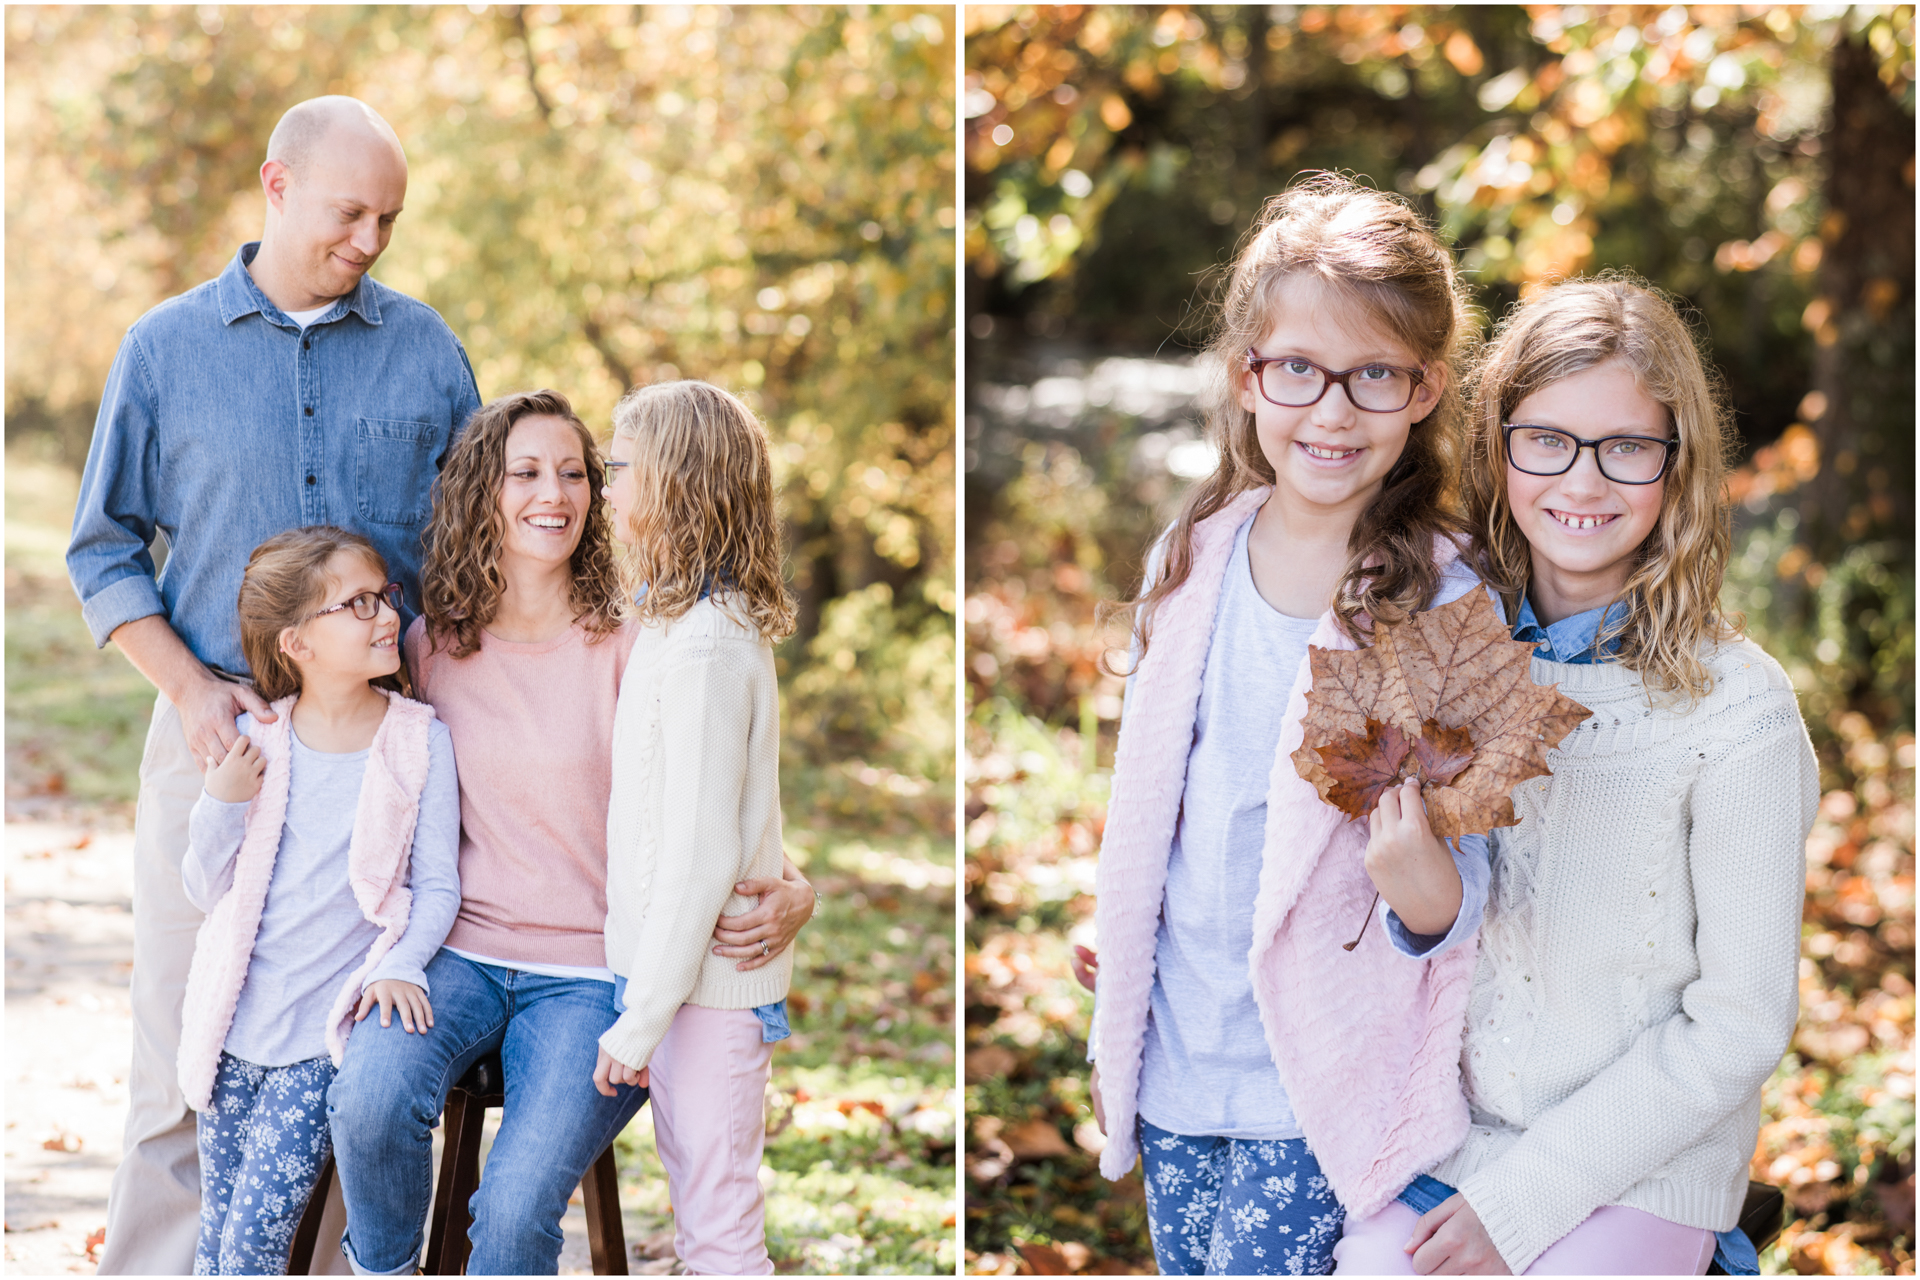 Family of Four - Autumn Family Session - kids photographed with glasses